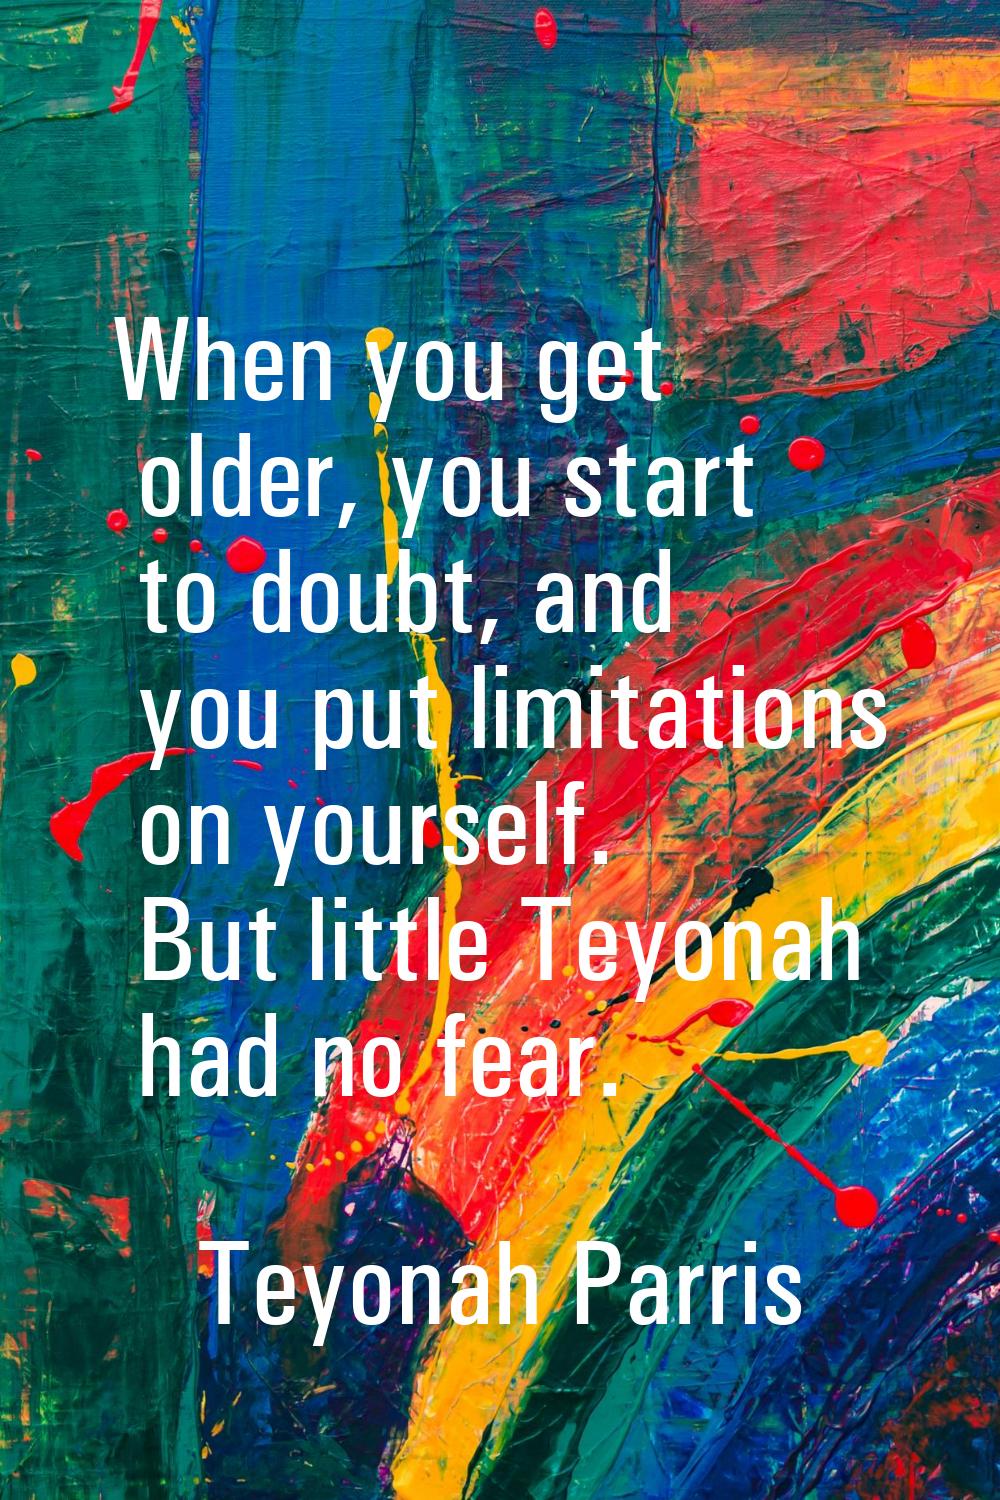 When you get older, you start to doubt, and you put limitations on yourself. But little Teyonah had